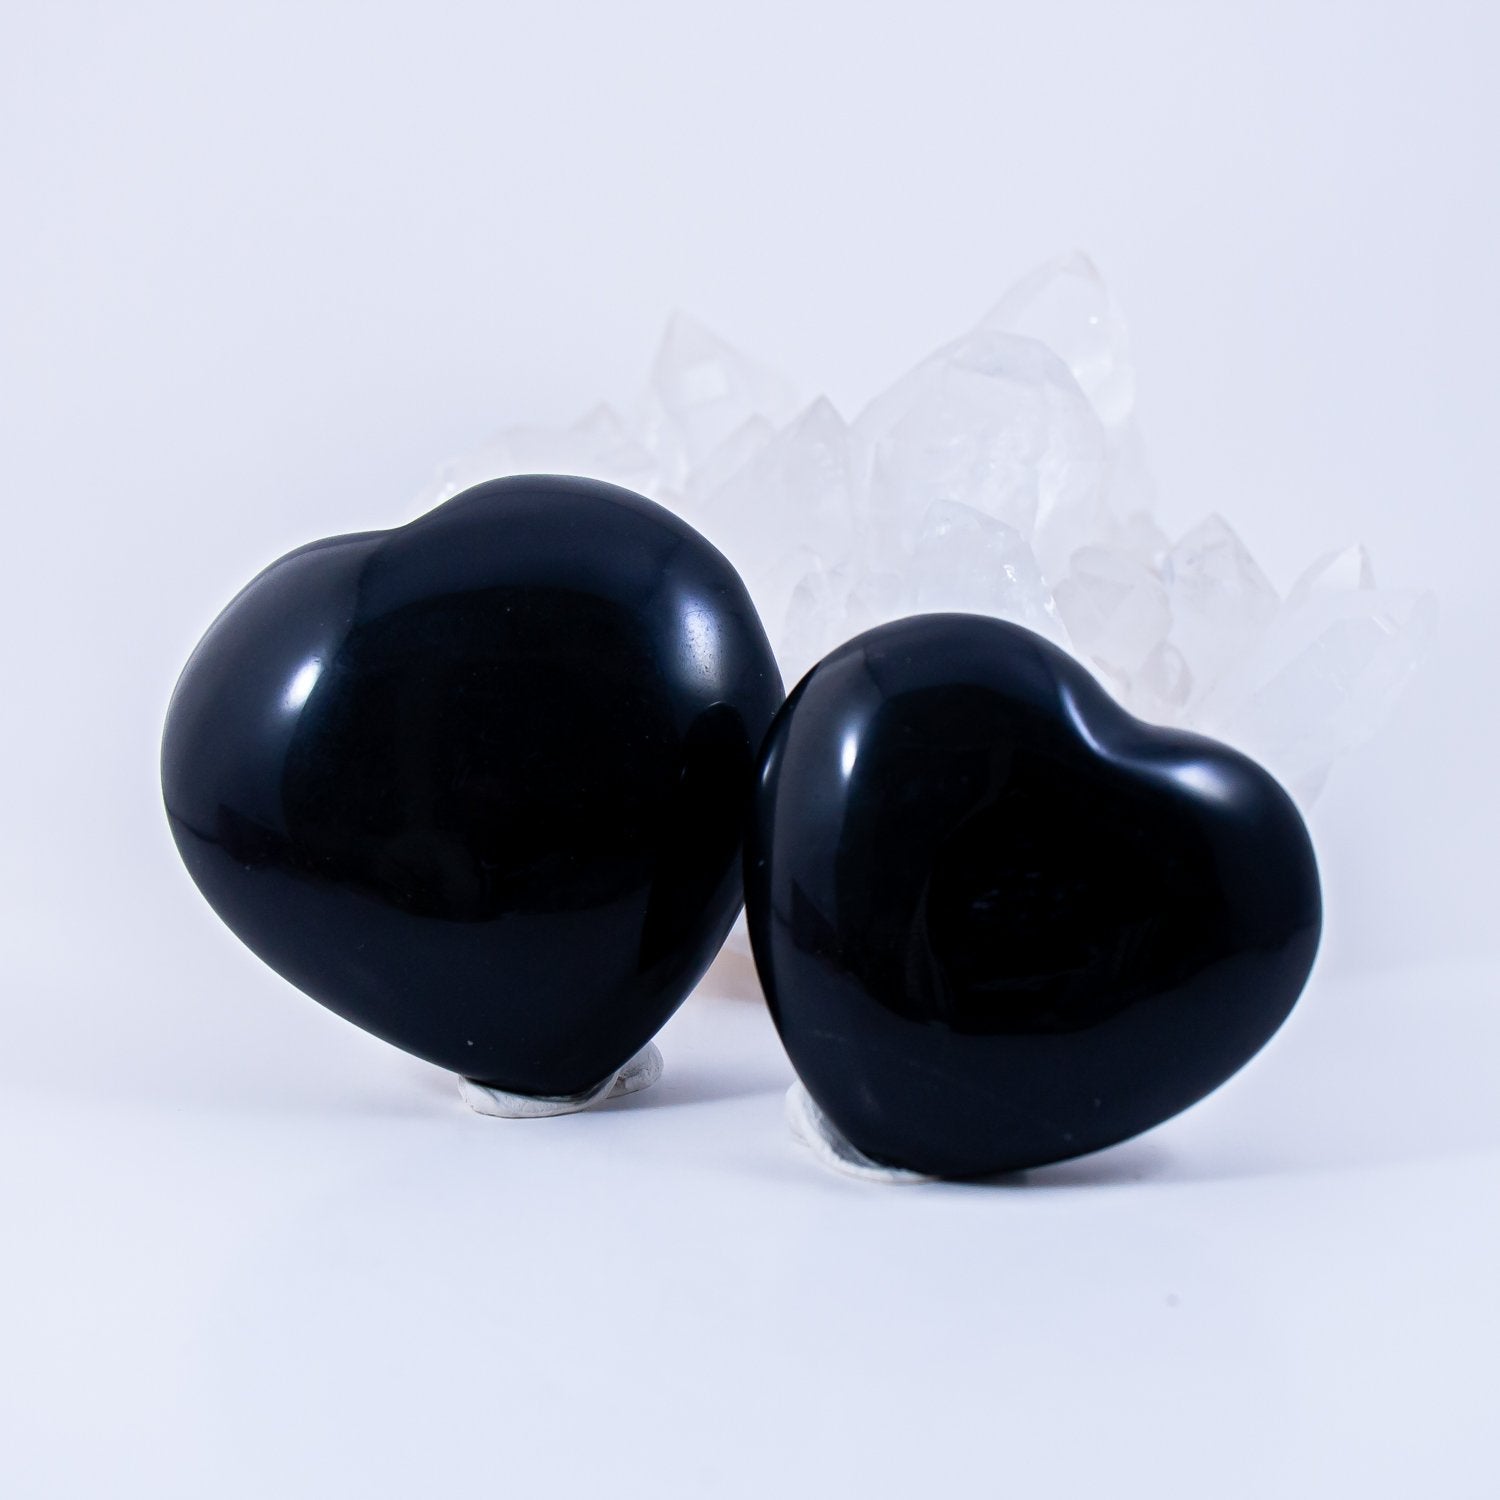 black onyx self mastery hearts. large and small.